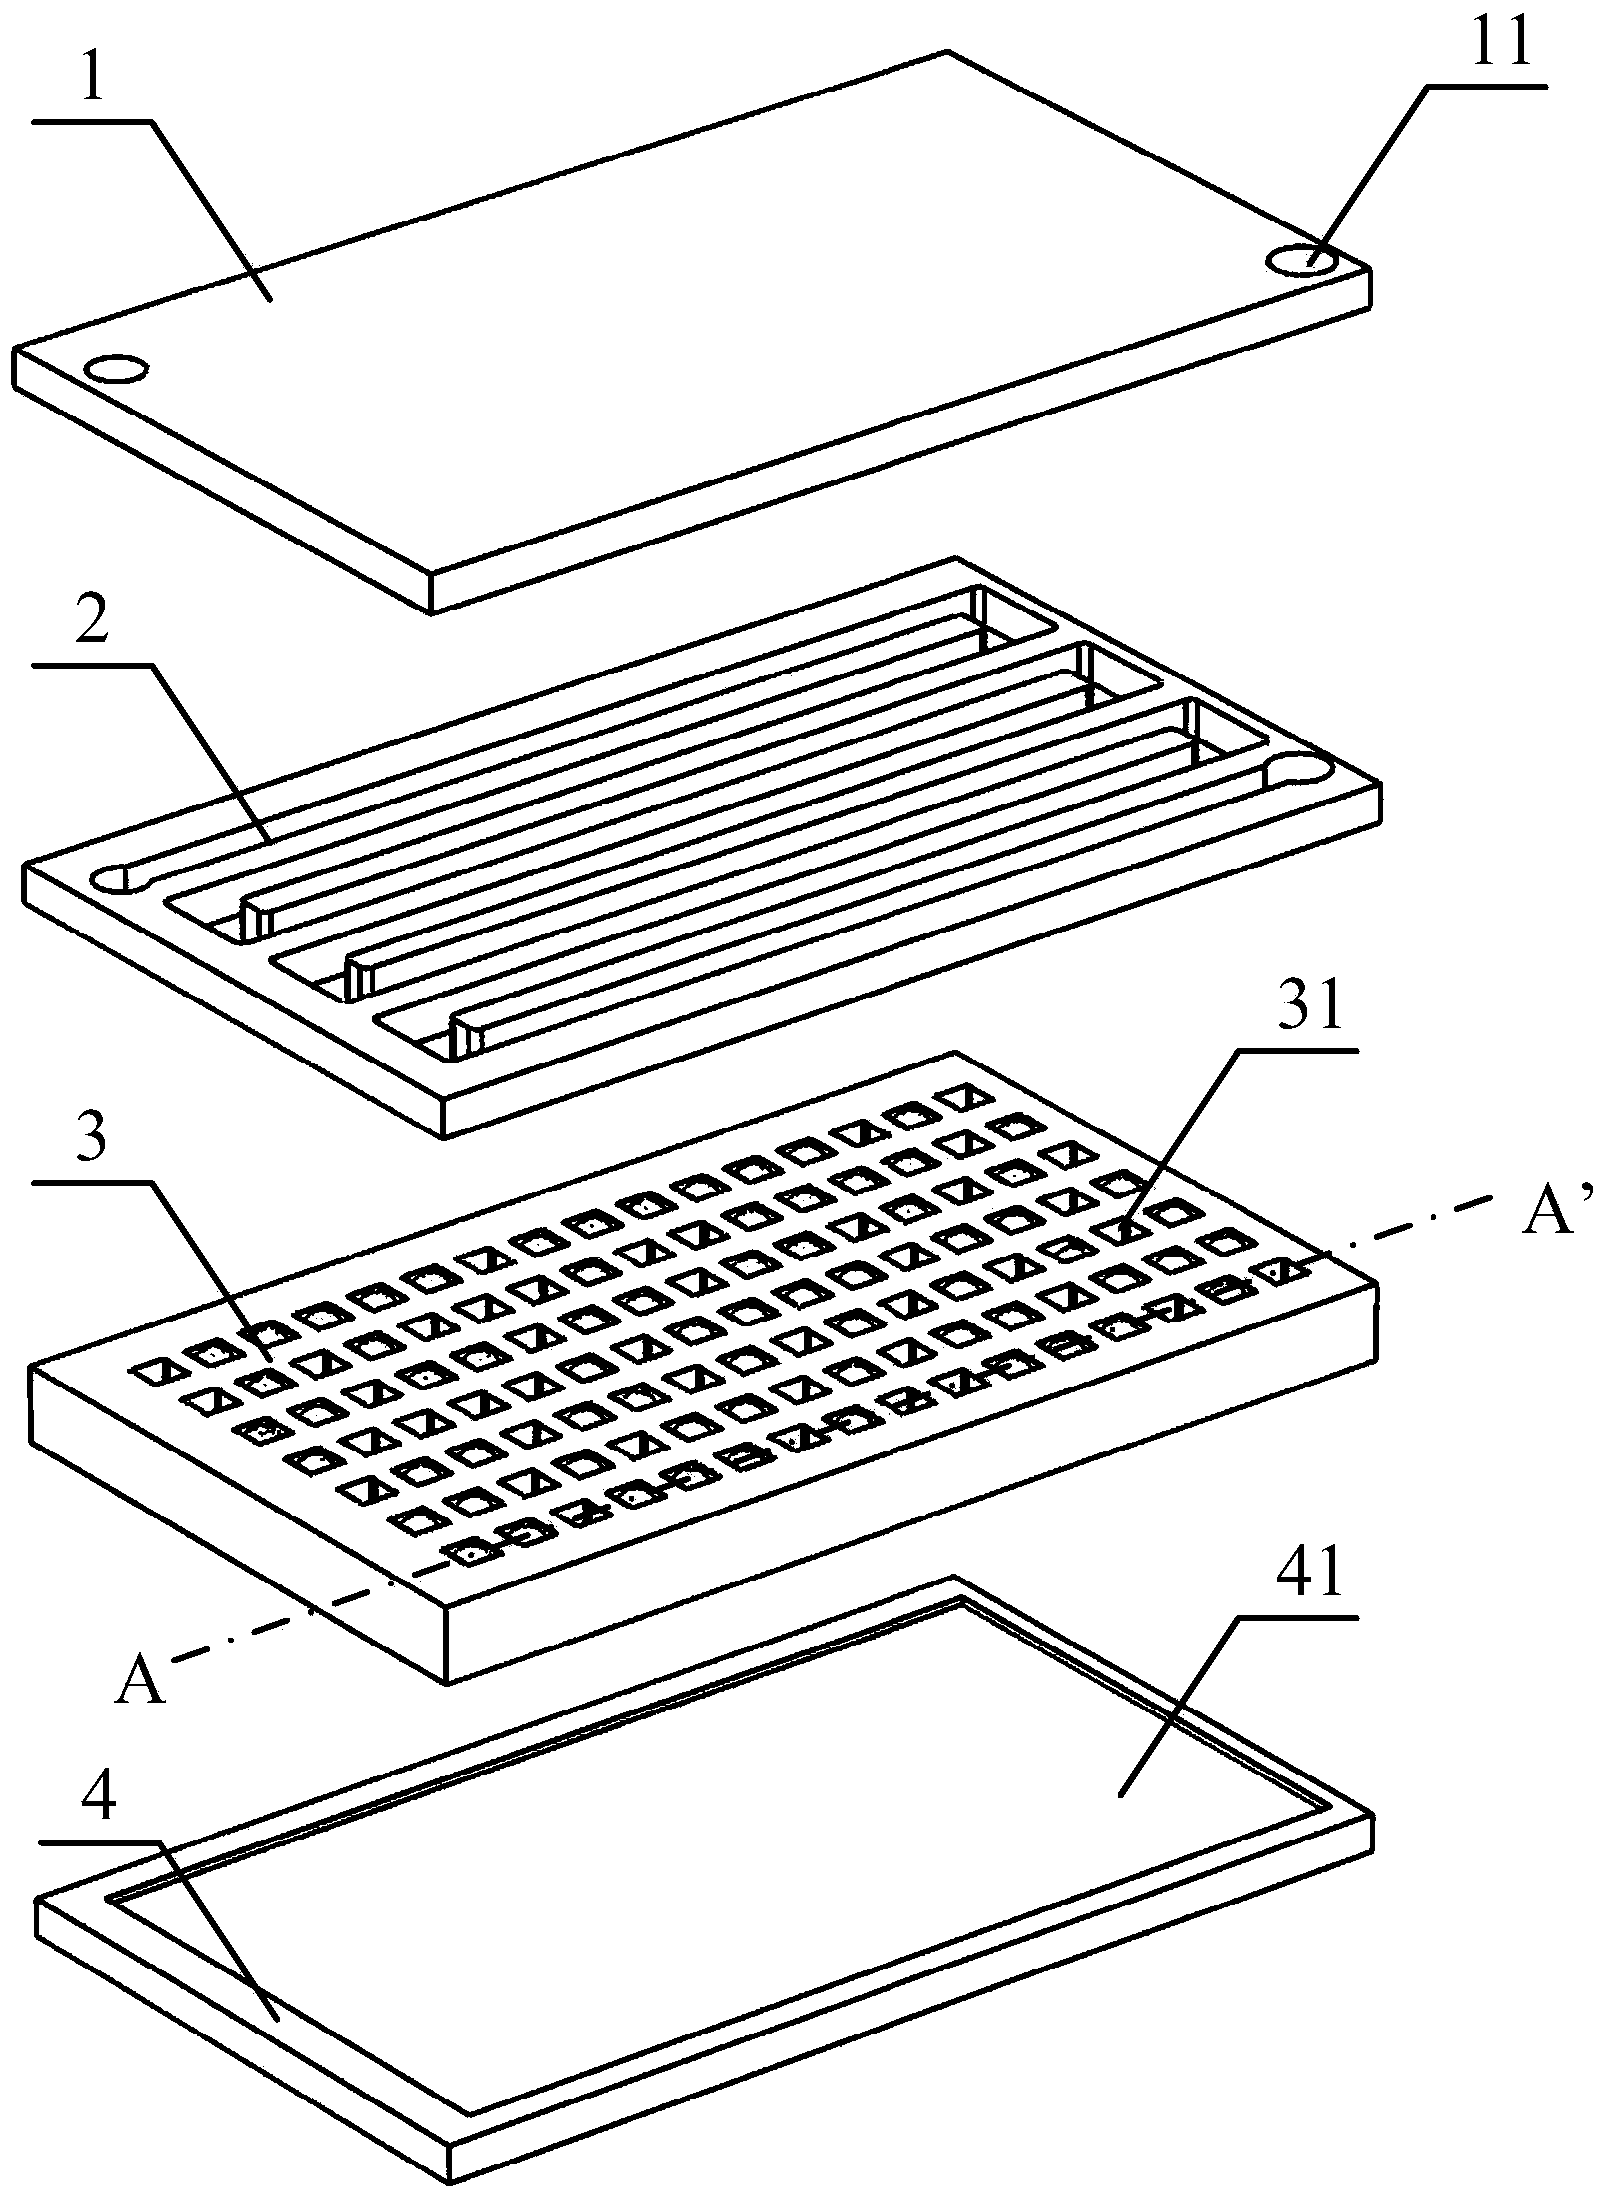 Micro-fluidic chip and micro-fluidic chip system for single cell analysis and single cell analyzing method